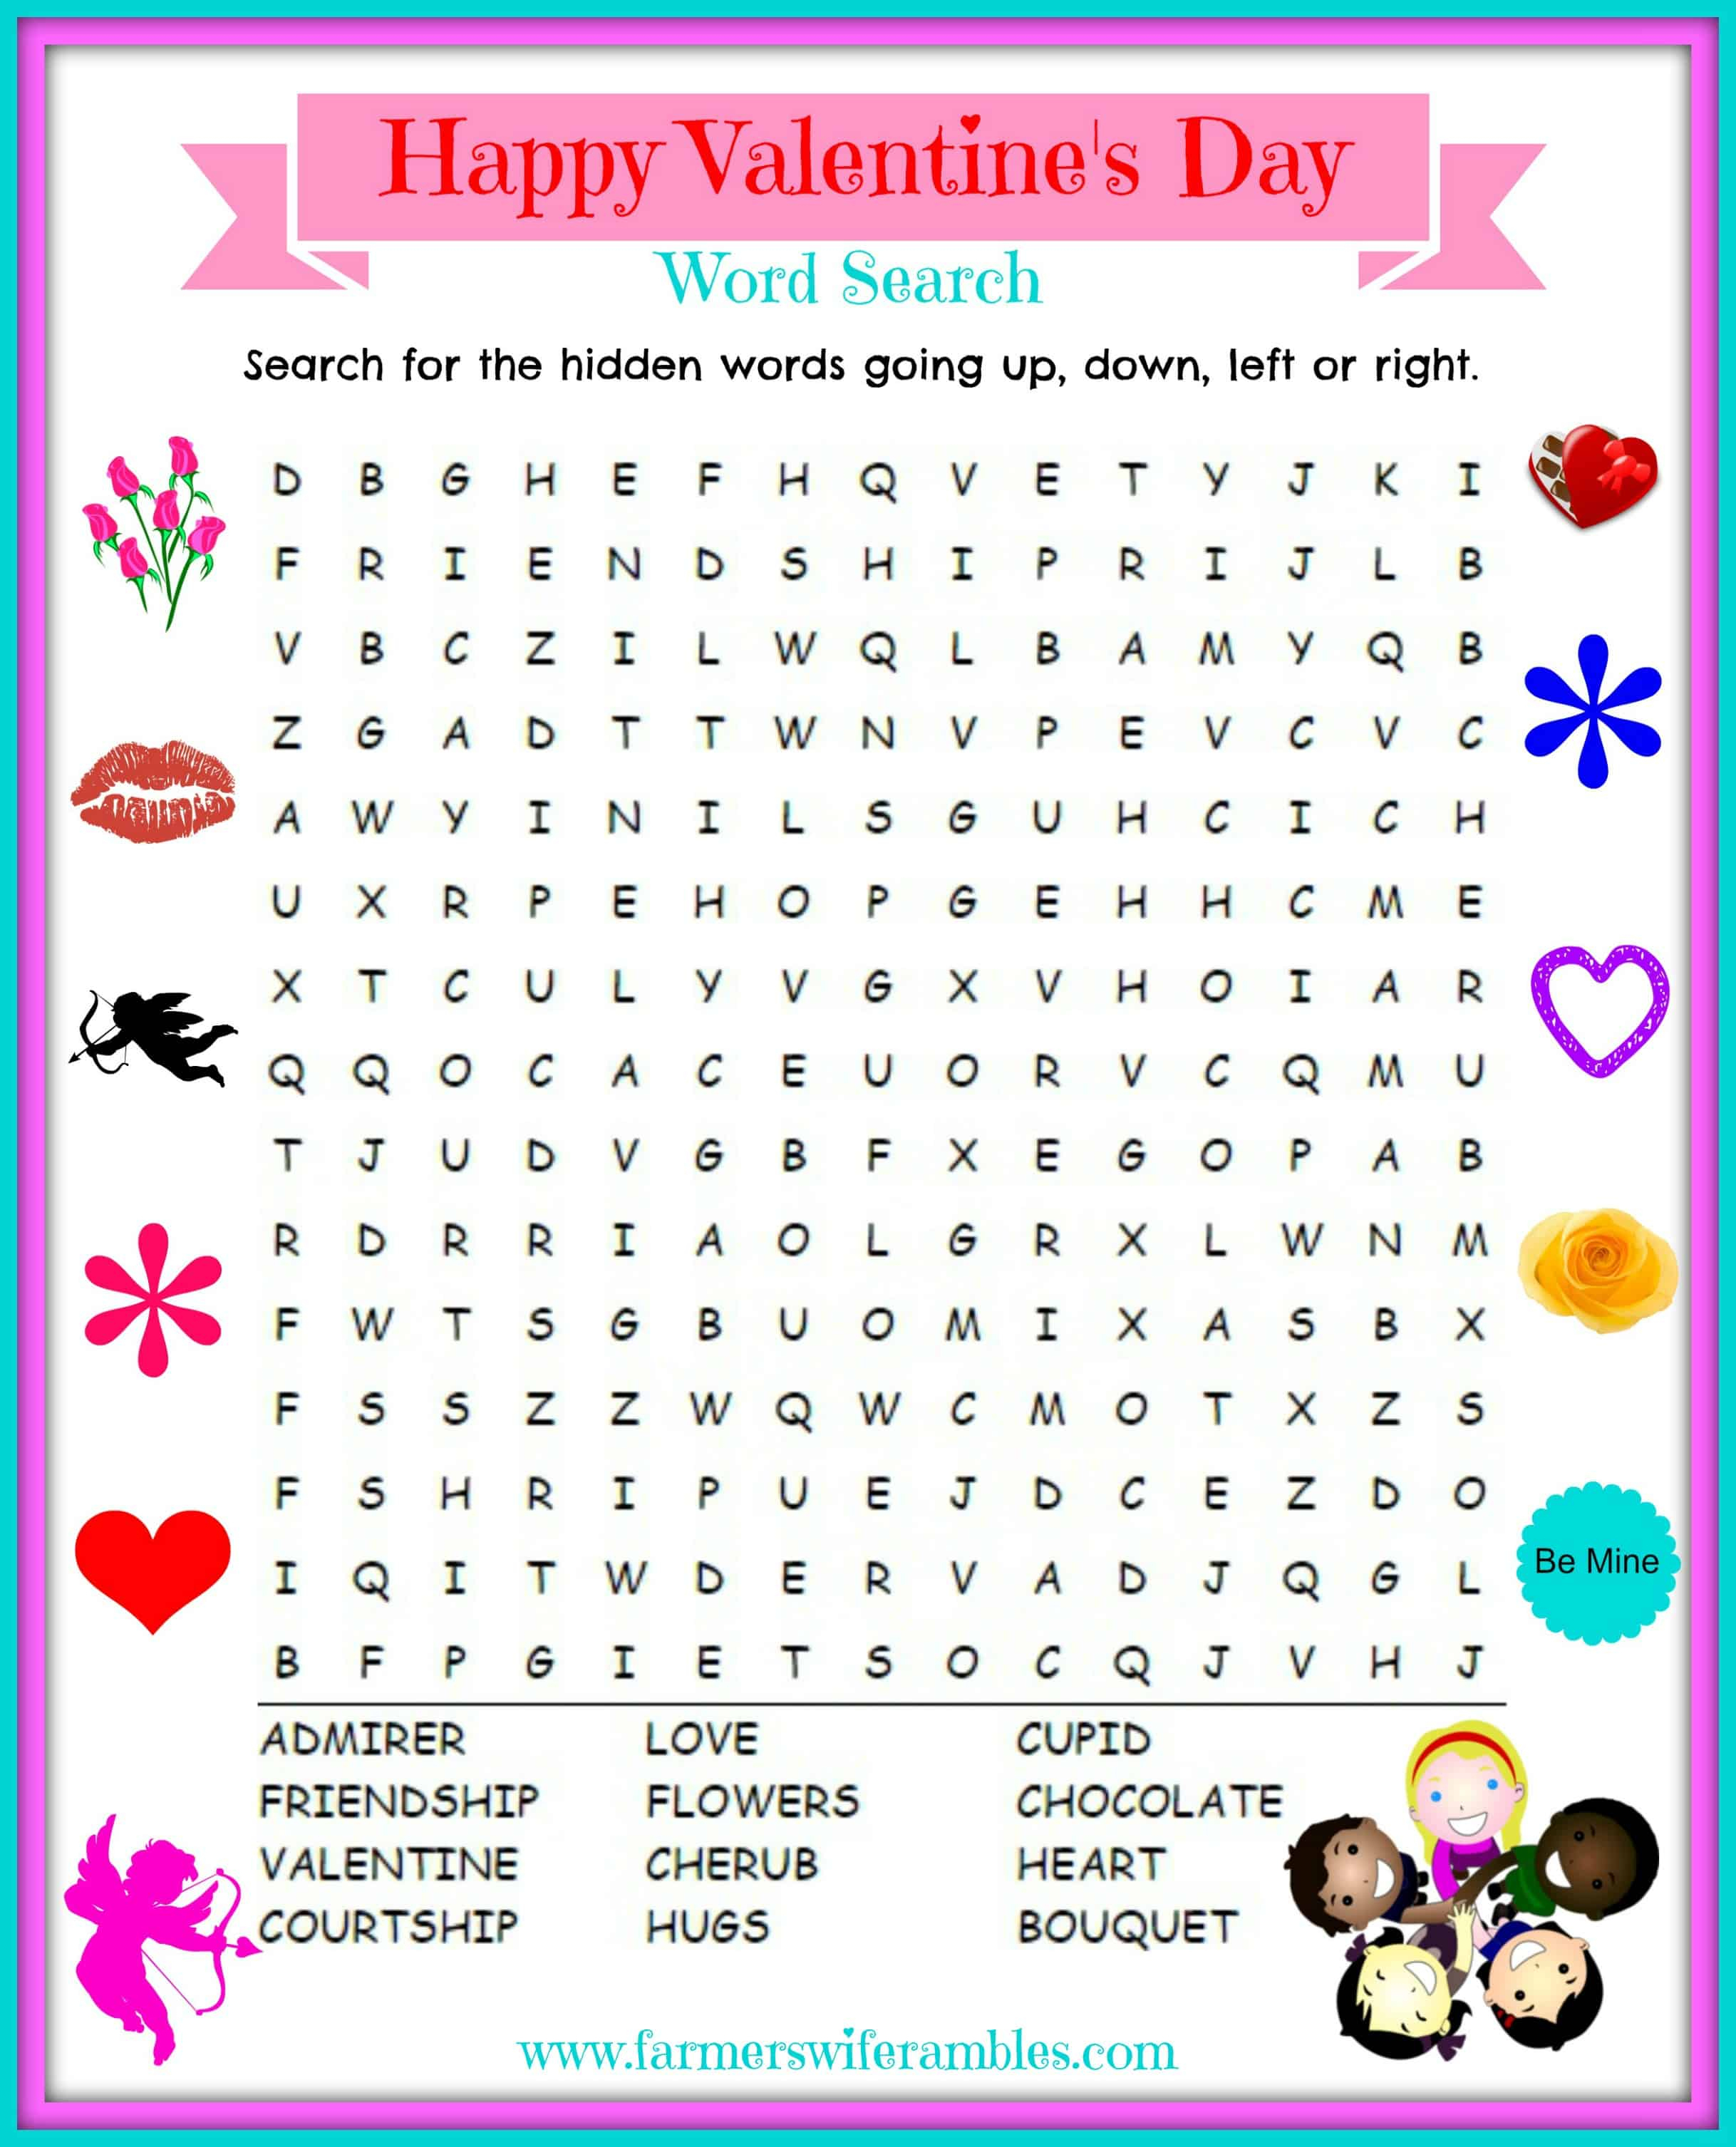 Valentines Day Printable Wordsearch - Farmer's Wife Rambles - Printable Christian Valentine Puzzles